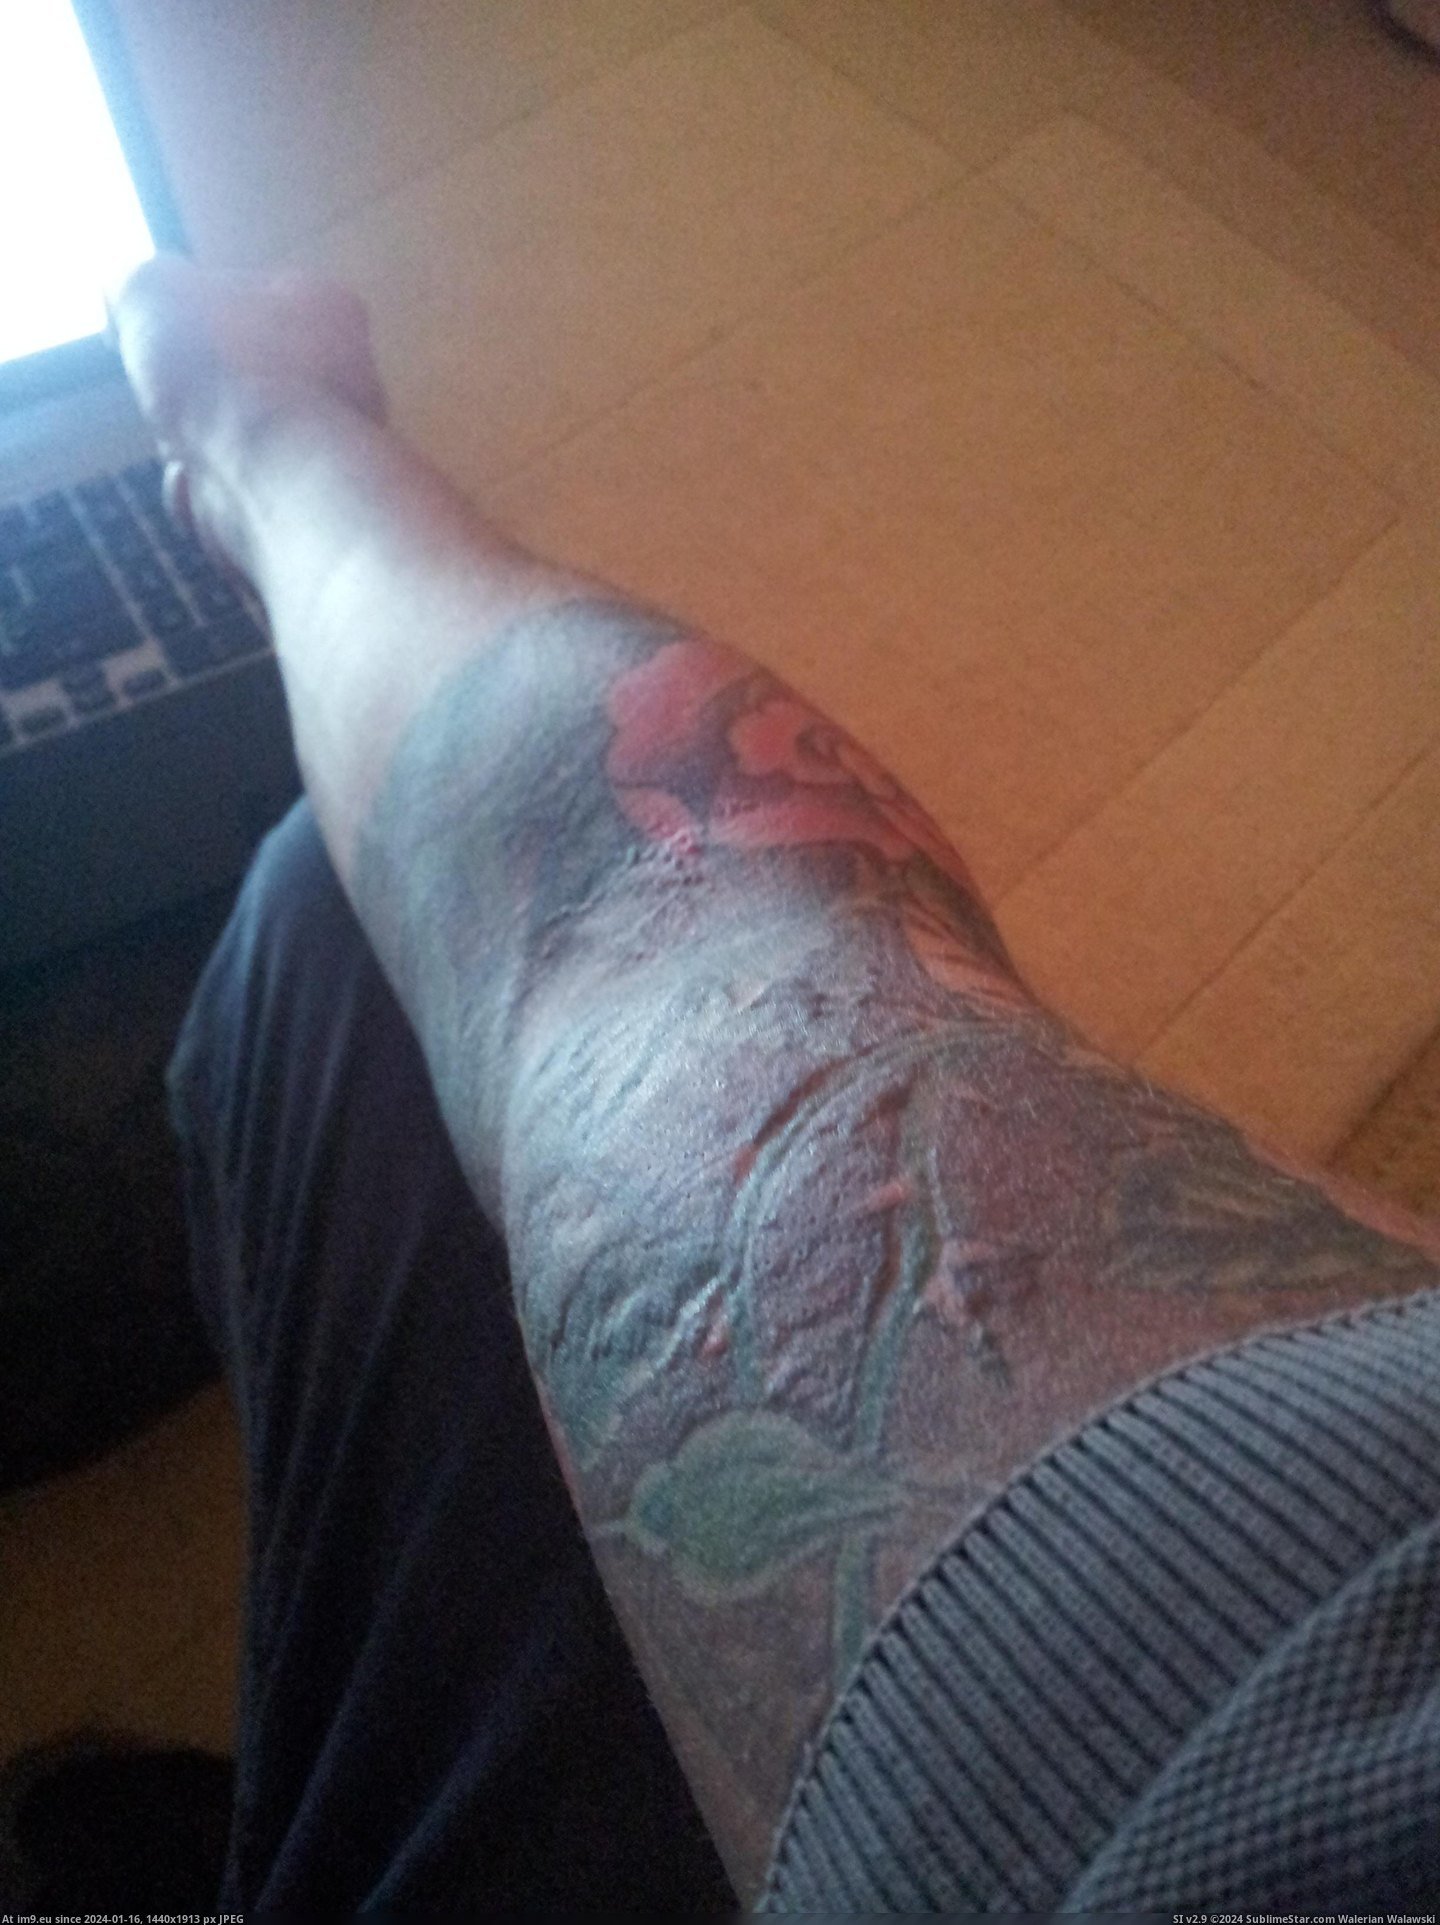 #Tattoo #Reaction #Allergic #Lines [Mildlyinteresting] An allergic reaction followed the lines of my tattoo. Pic. (Bild von album My r/MILDLYINTERESTING favs))